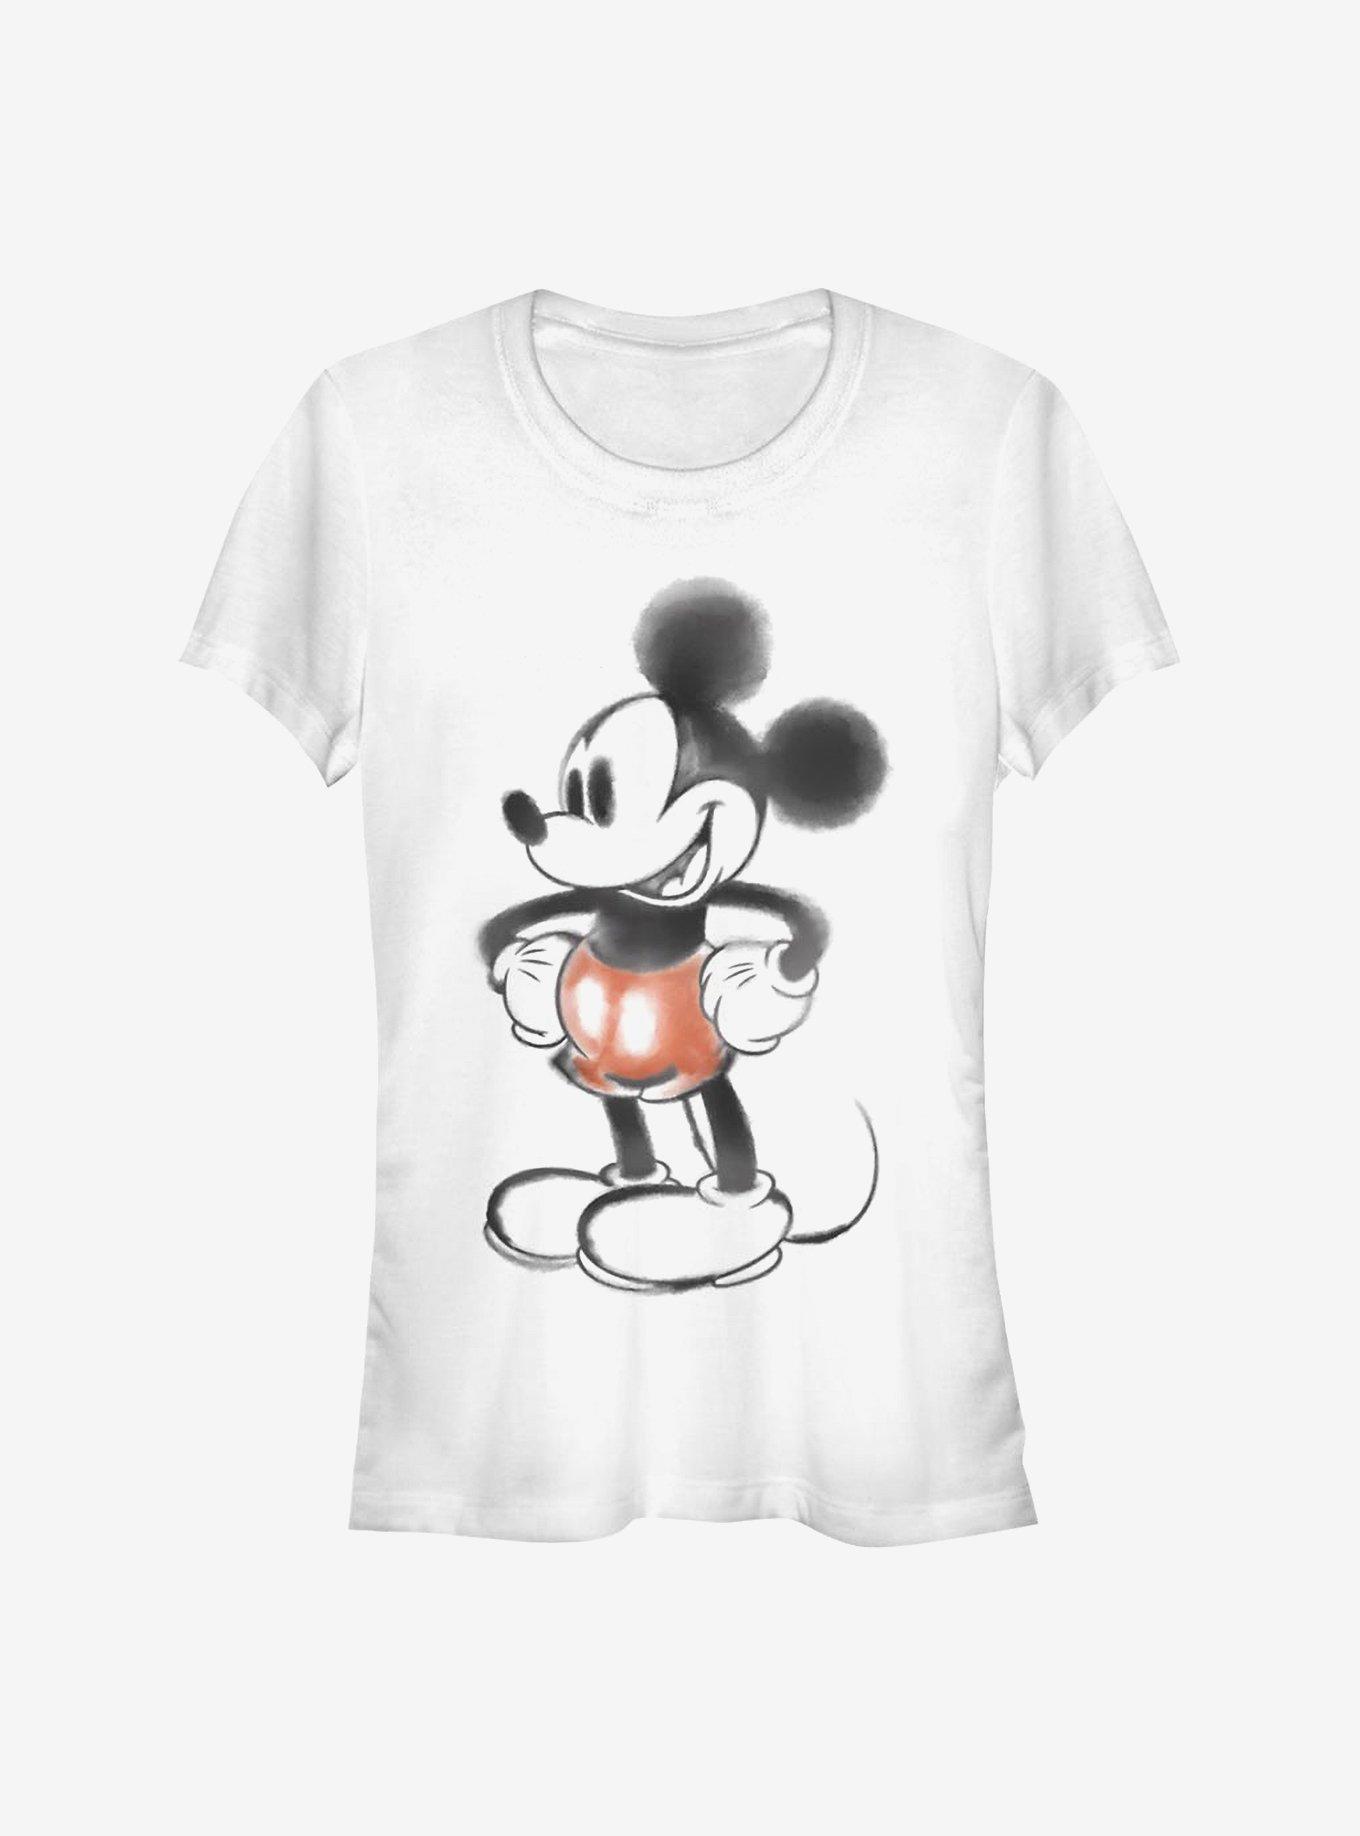 Disney Mickey Mouse Mickey Watery Girls T-Shirt, WHITE, hi-res